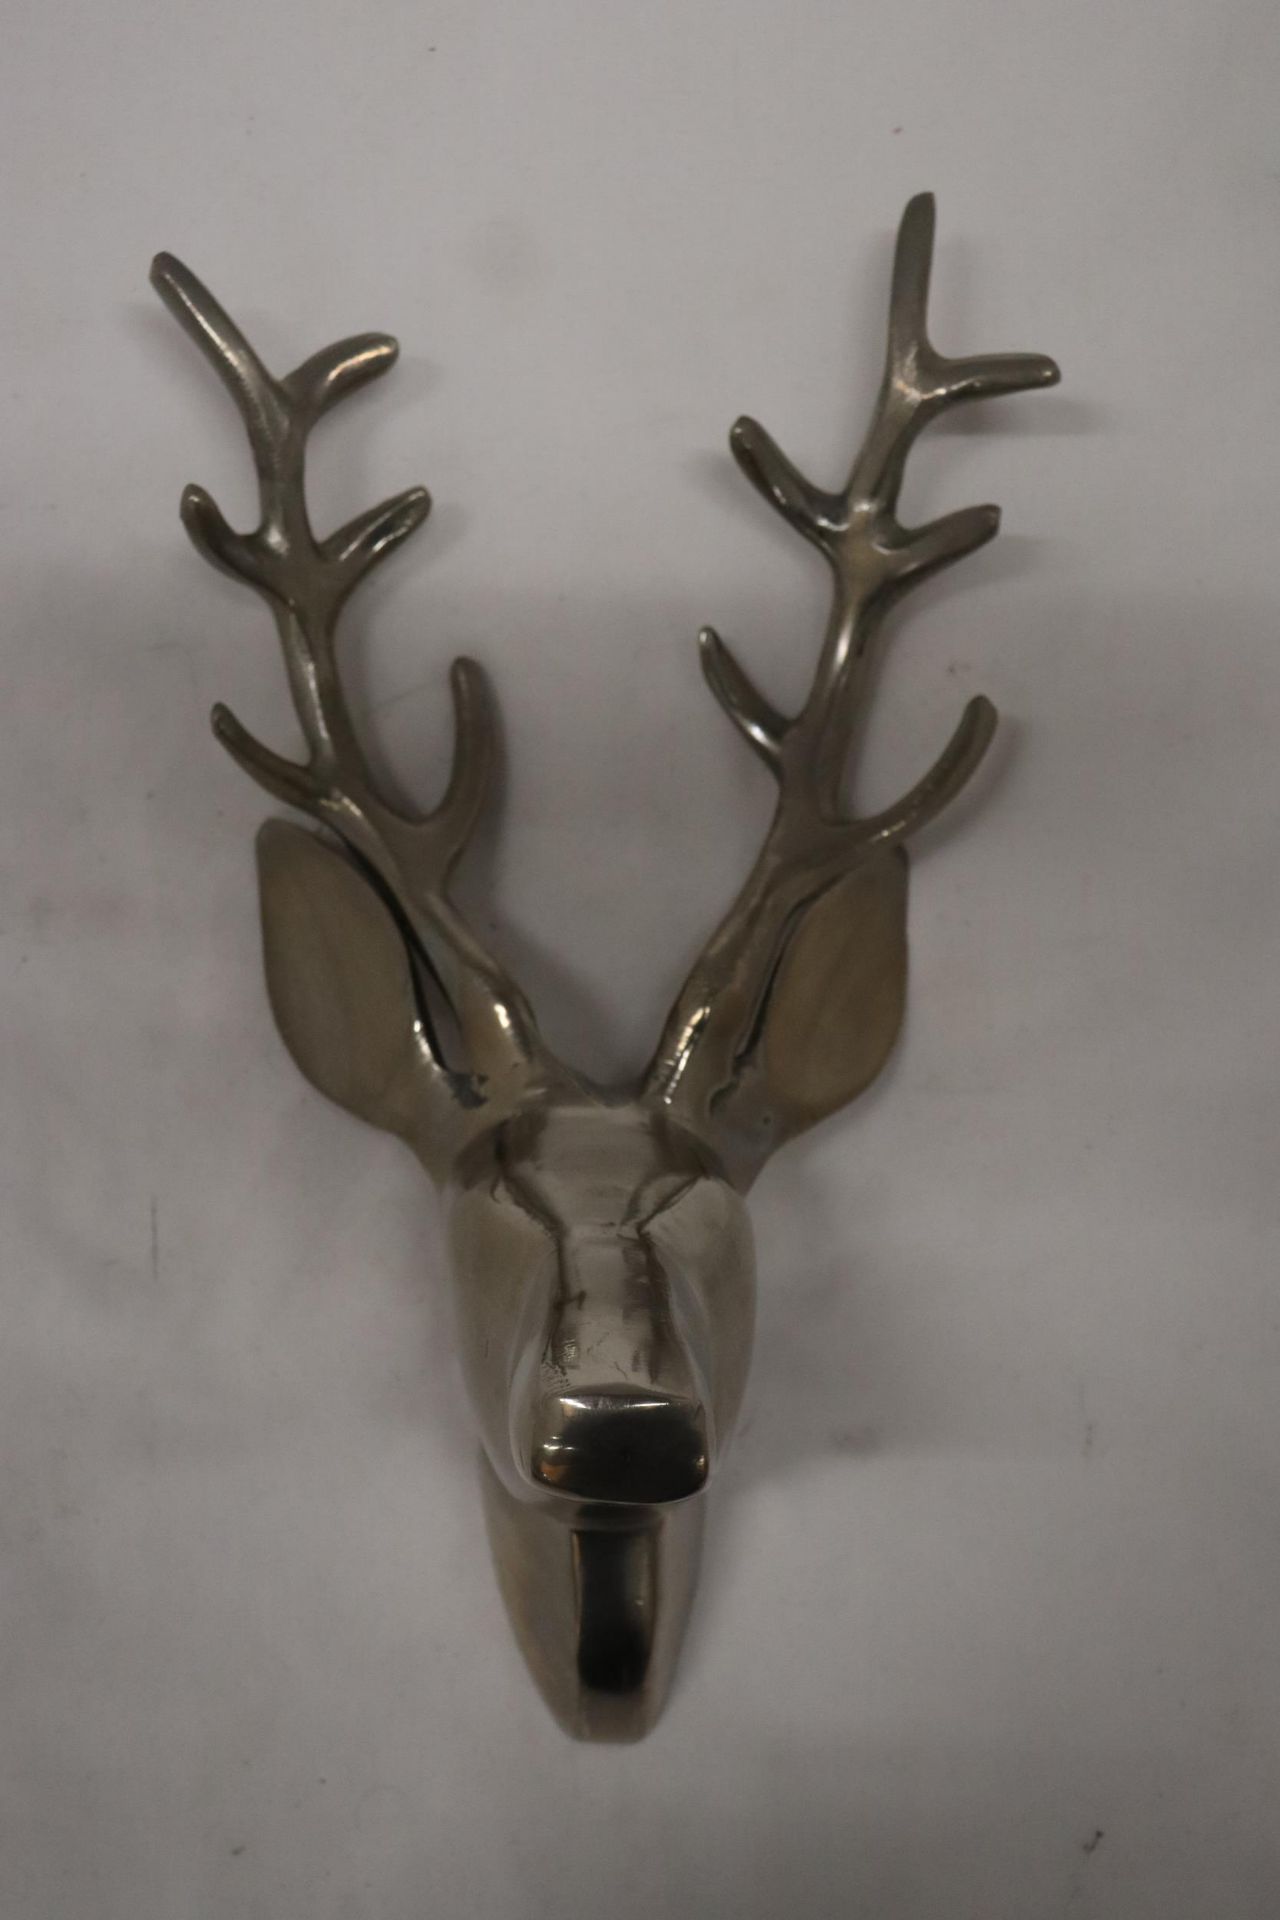 A STAINLESS STEEL DEER WALL HANGING